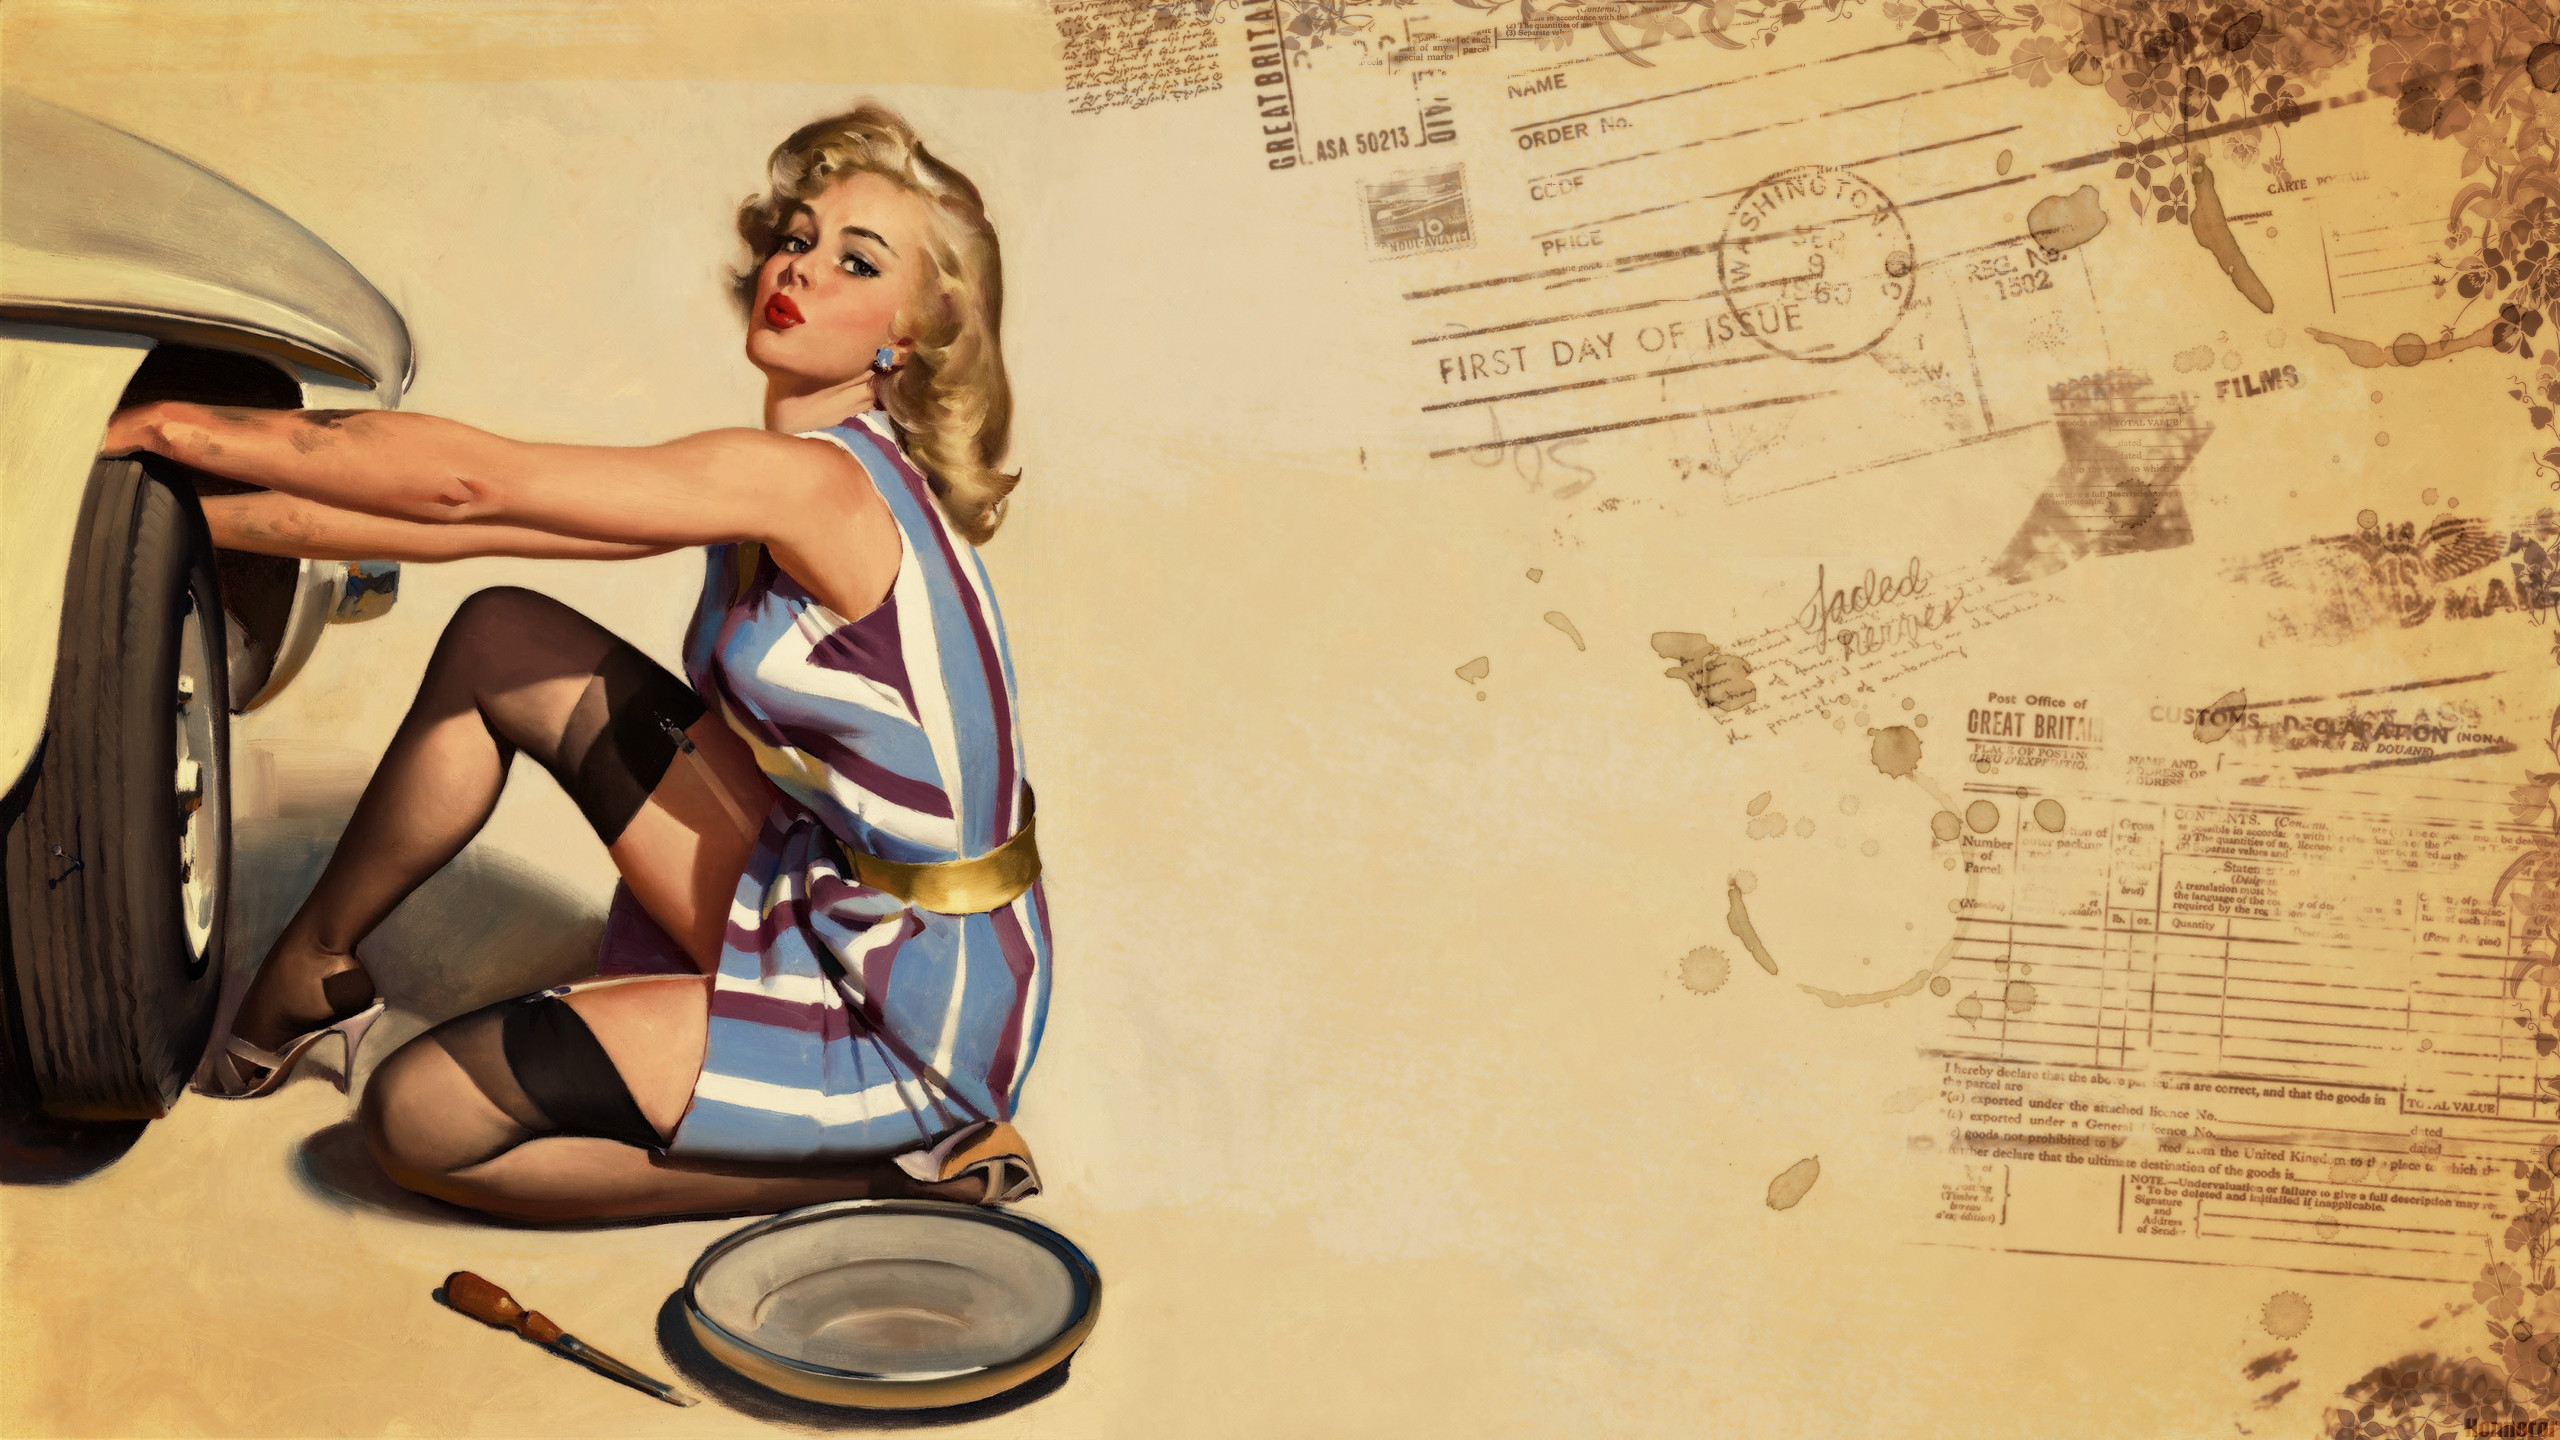 Vintage Pin Up Wallpaper (62+ pictures)